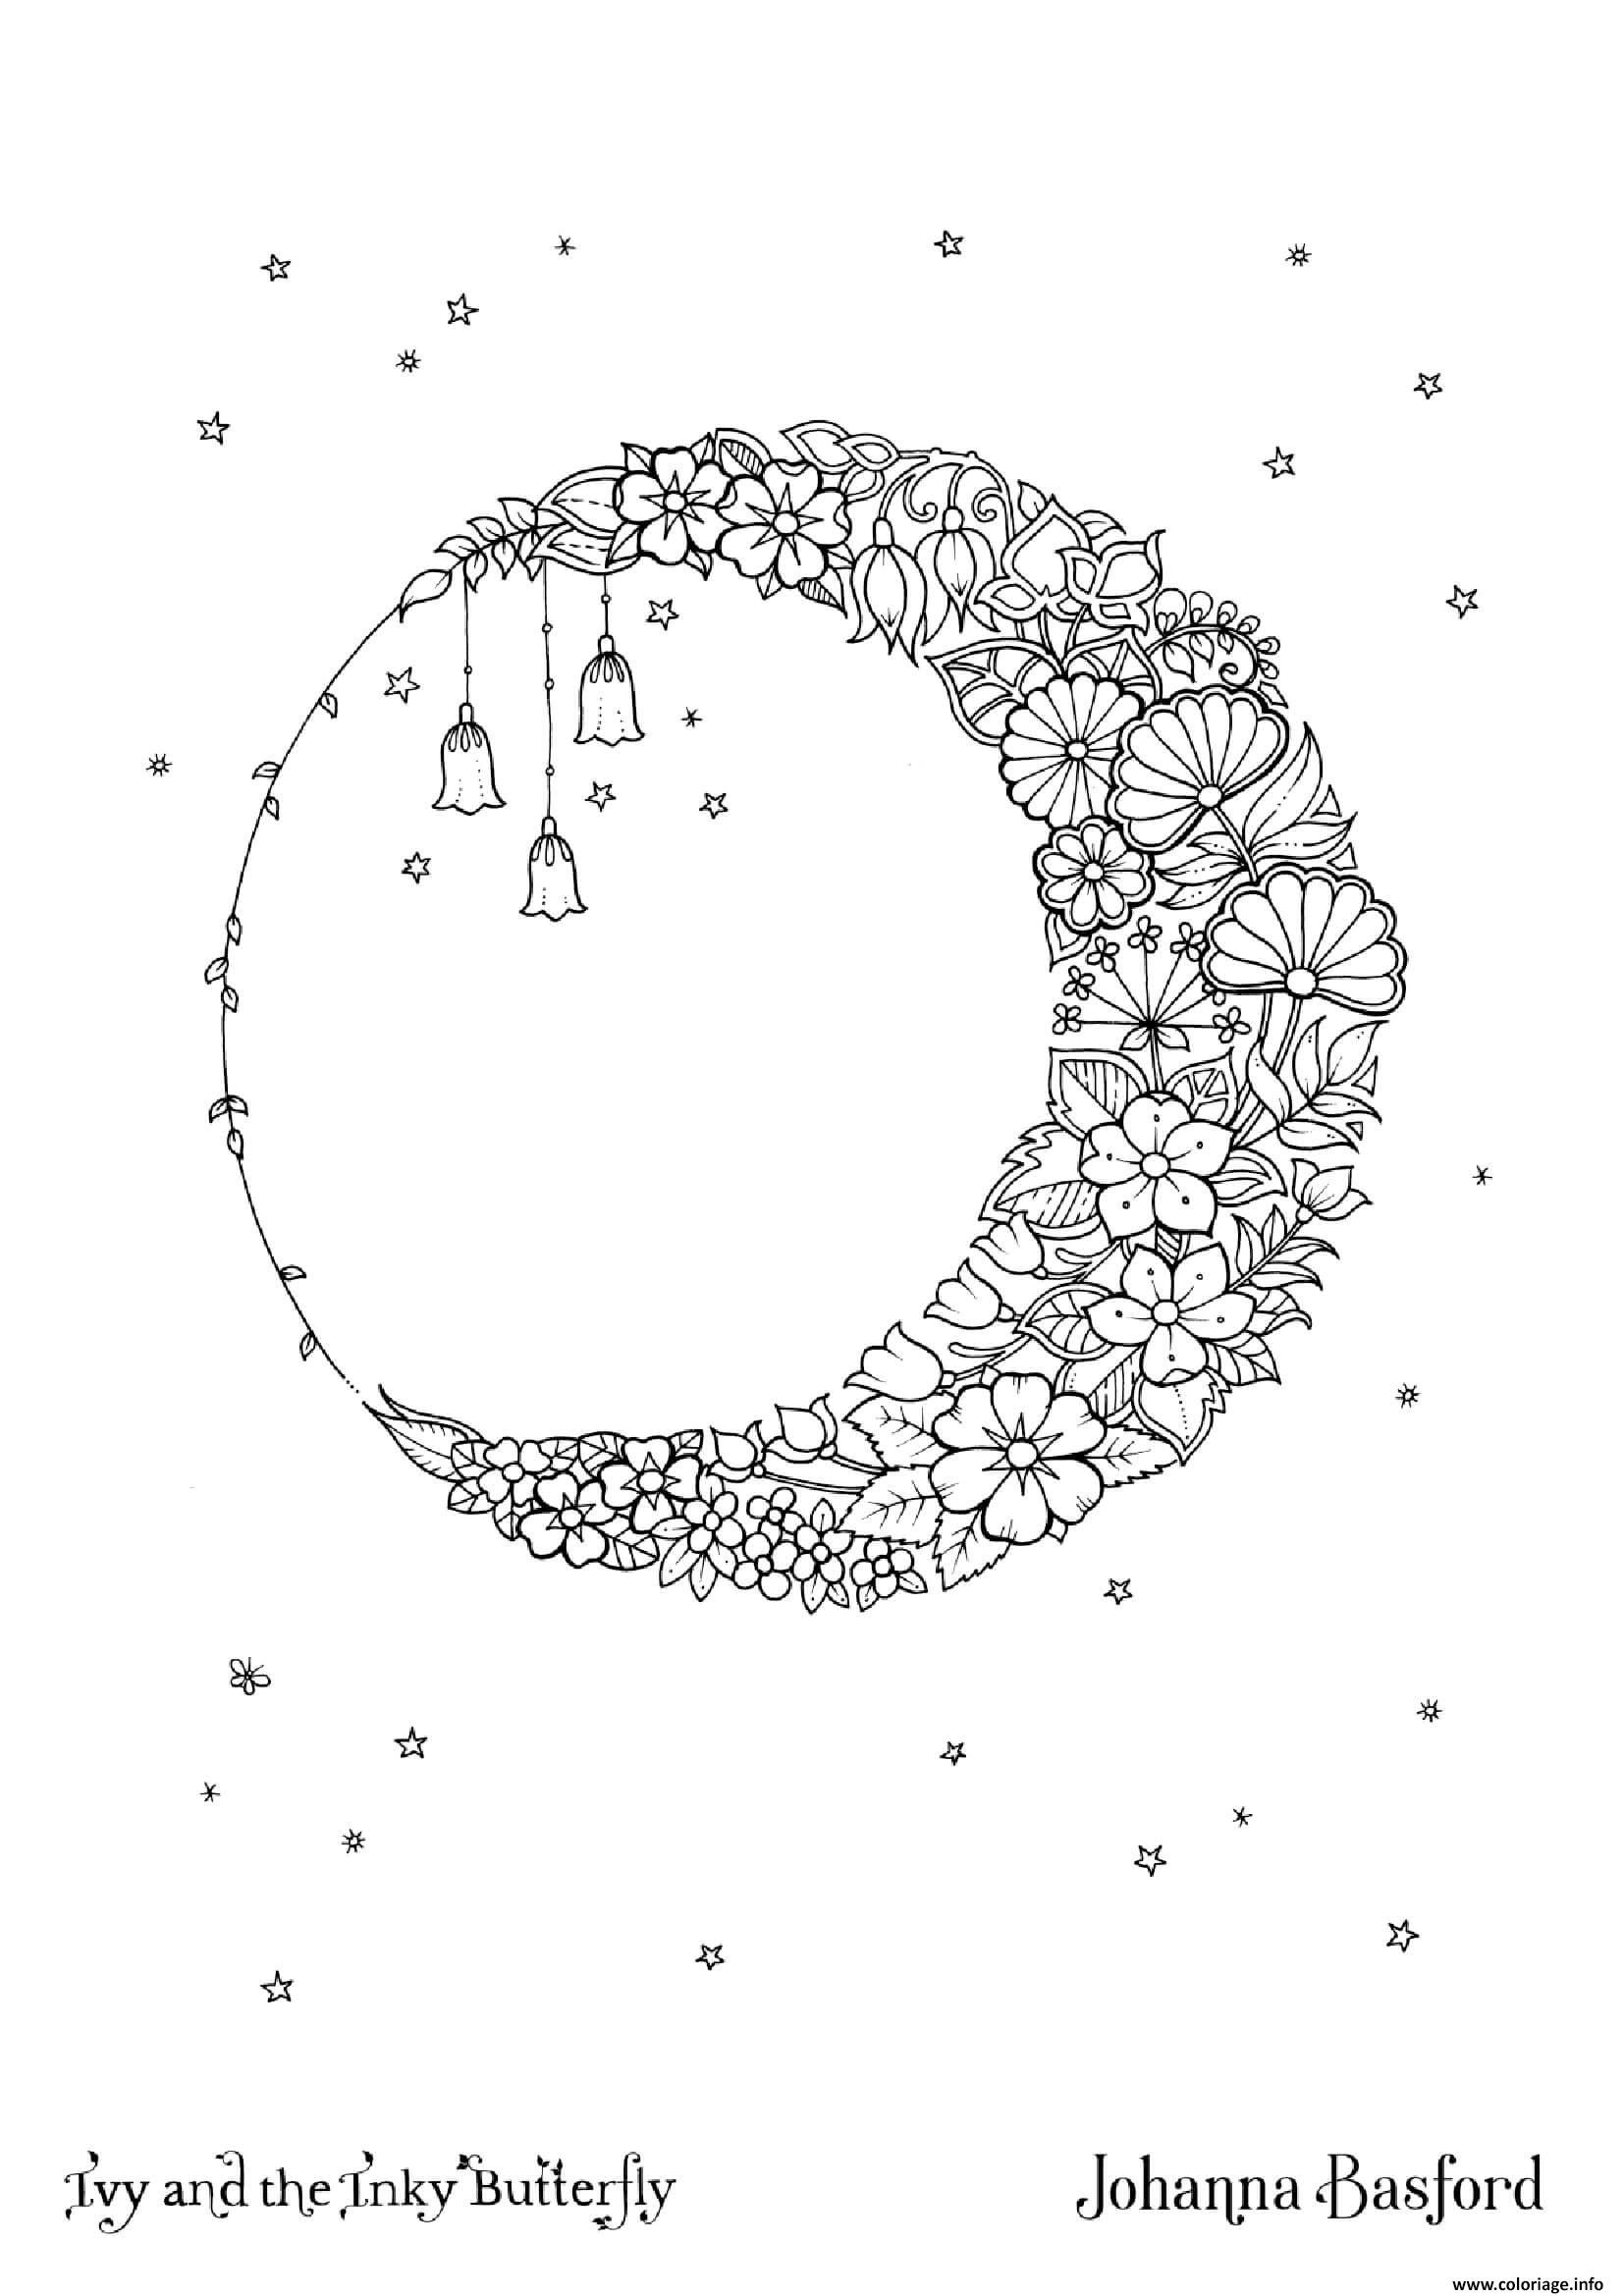 Dessin Adulte Flower Moon From Ivy And The Inky Butterfly Coloriage Gratuit à Imprimer